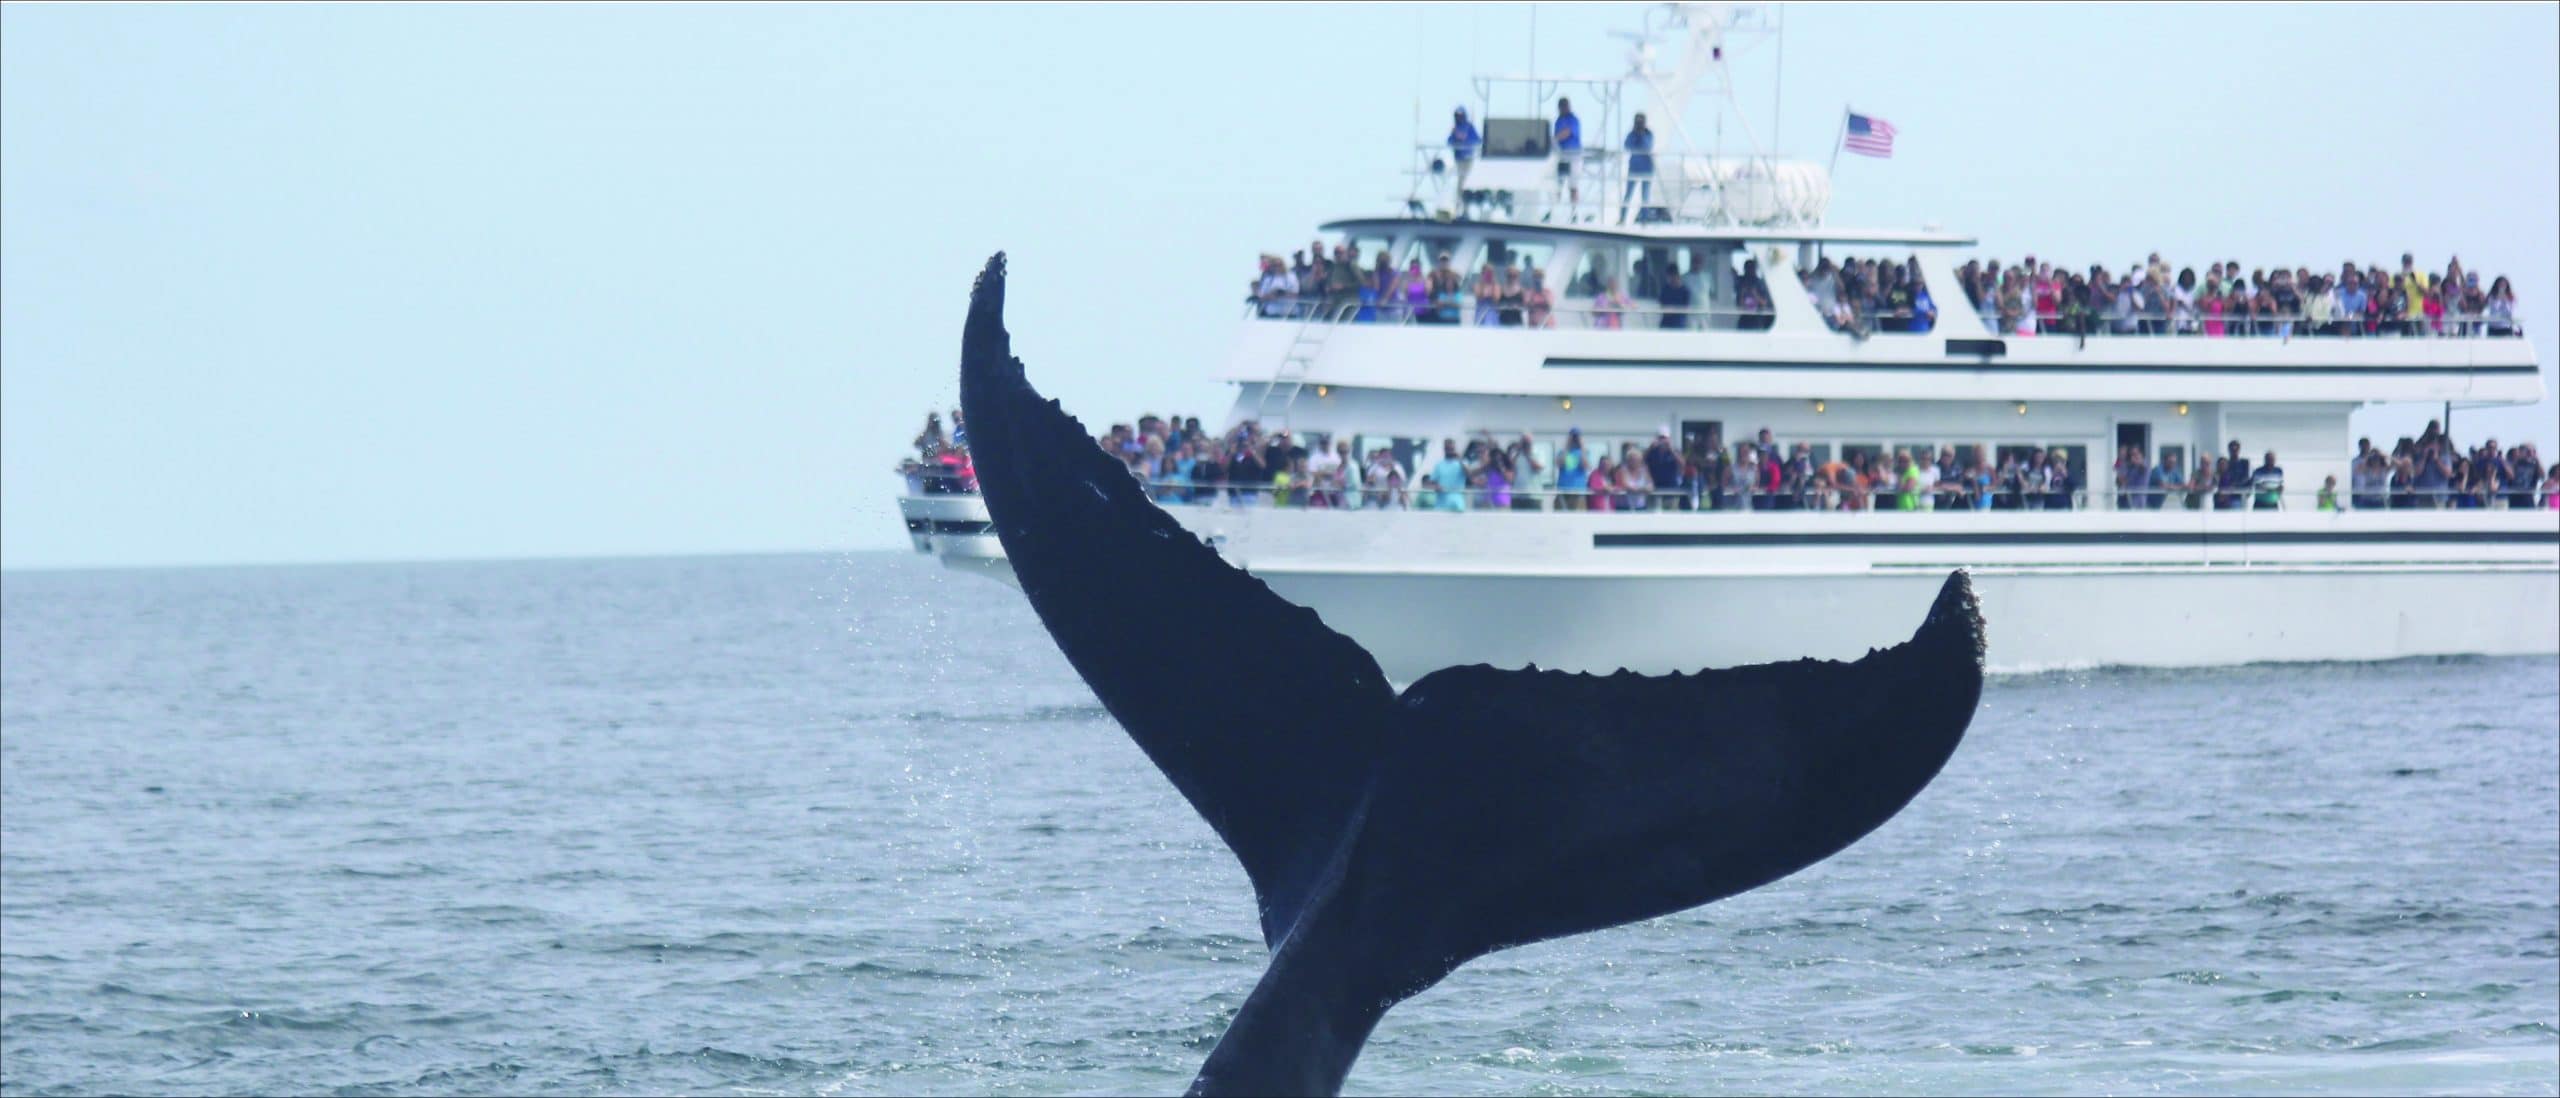 Image of commercial whale watch boat with lots of passengers onboard with a humpback fluke in the foreground